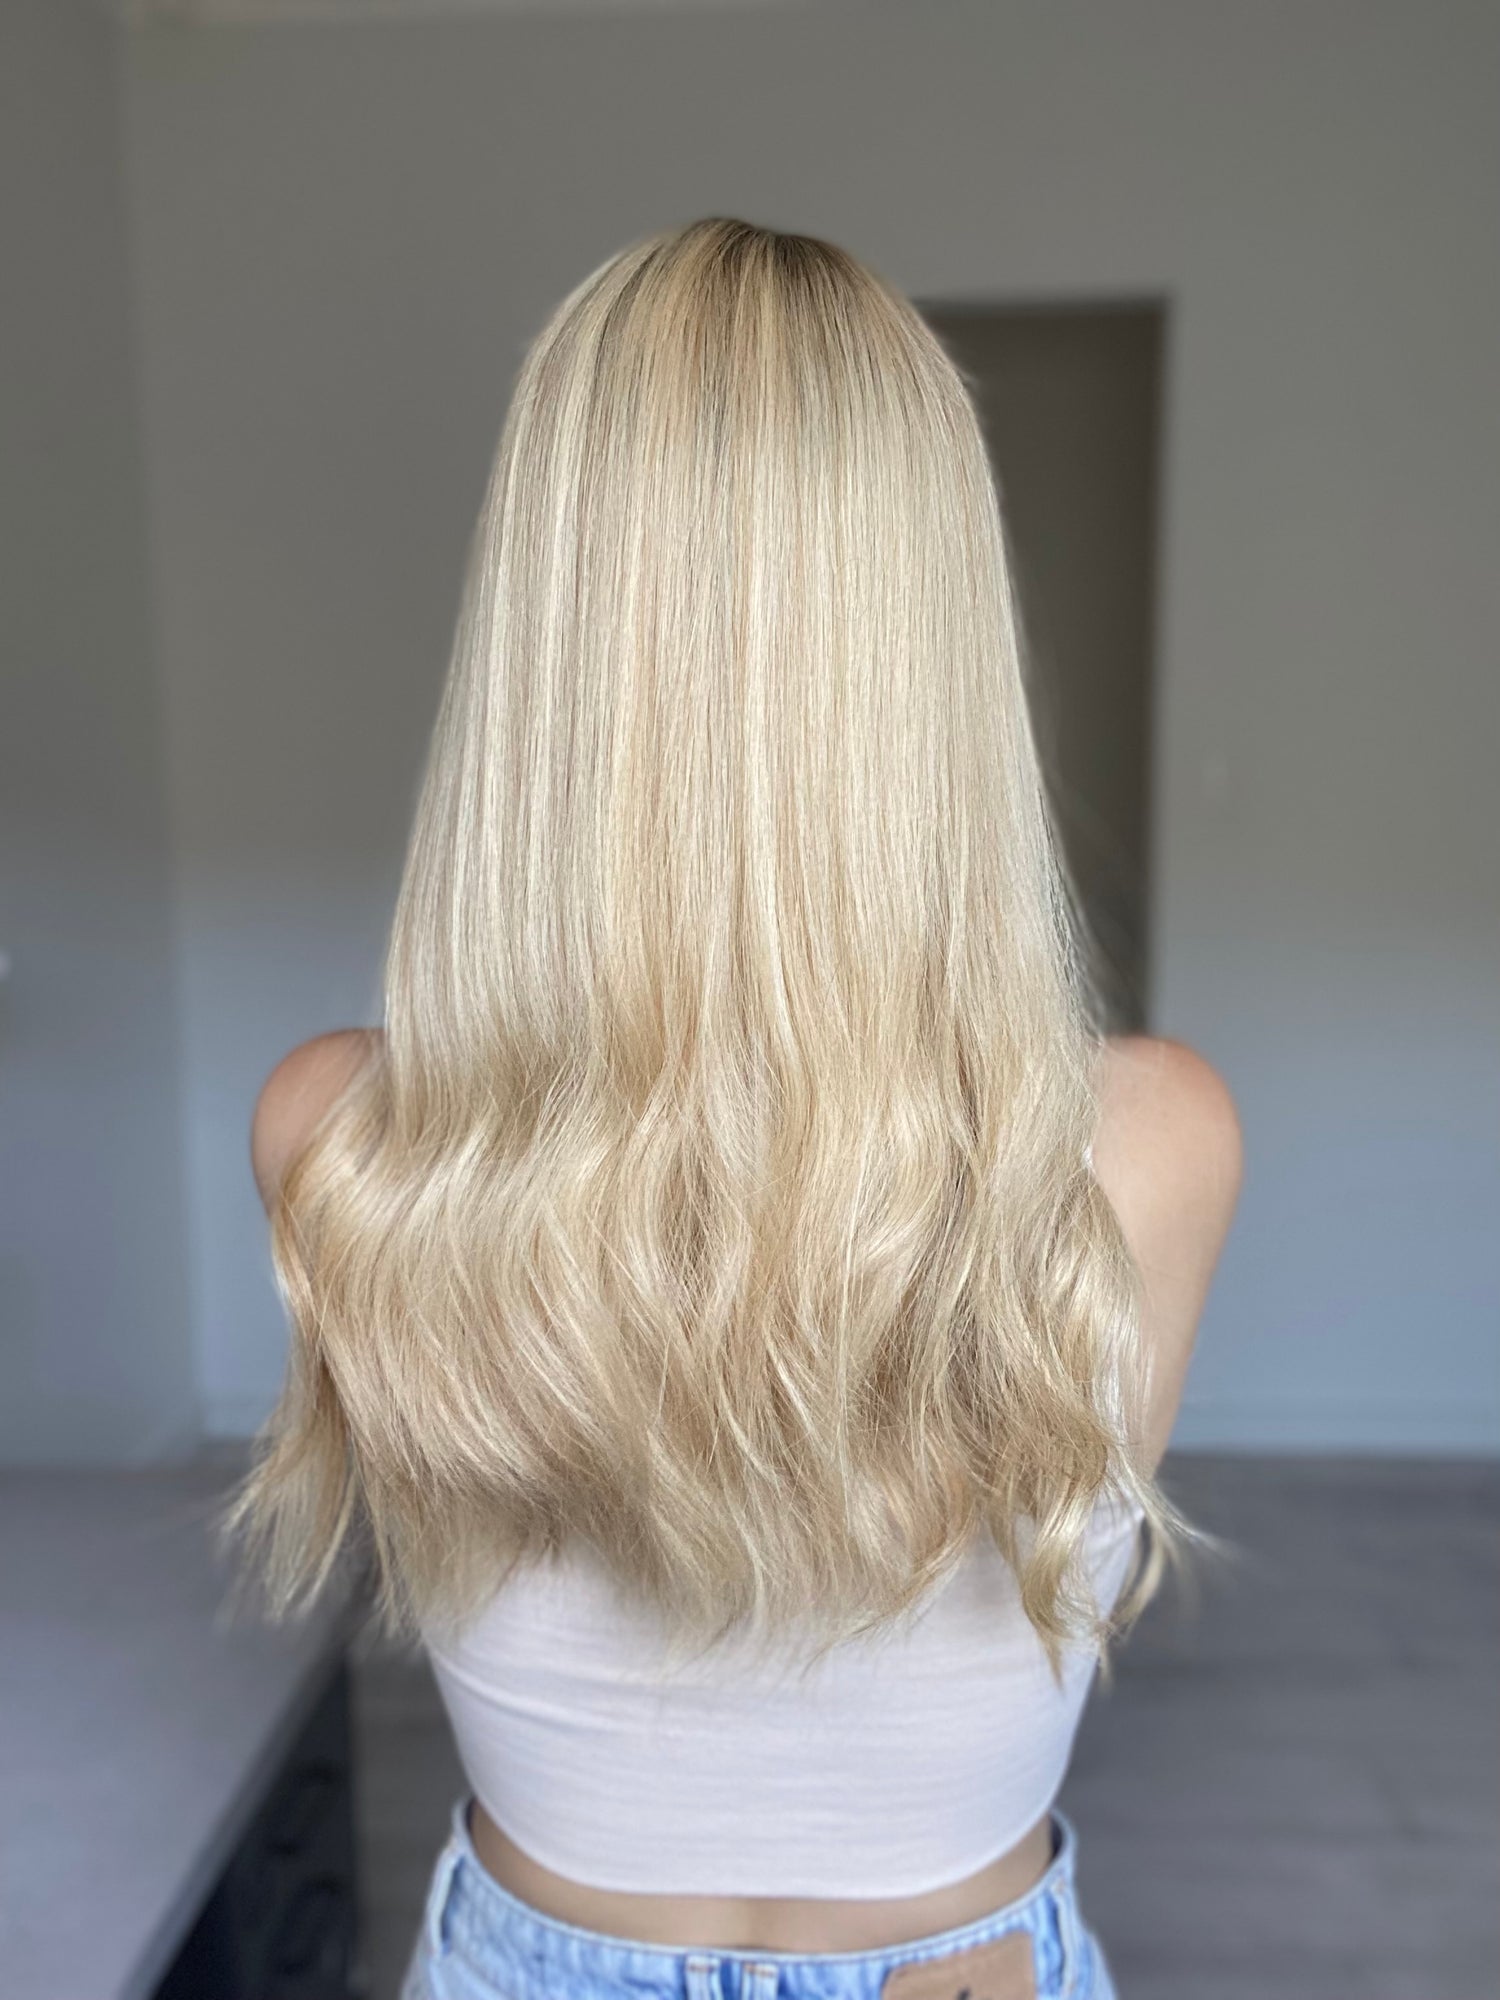 Dimensional Blonde Goals // Lace Topper // 10x10 // 22 Inches